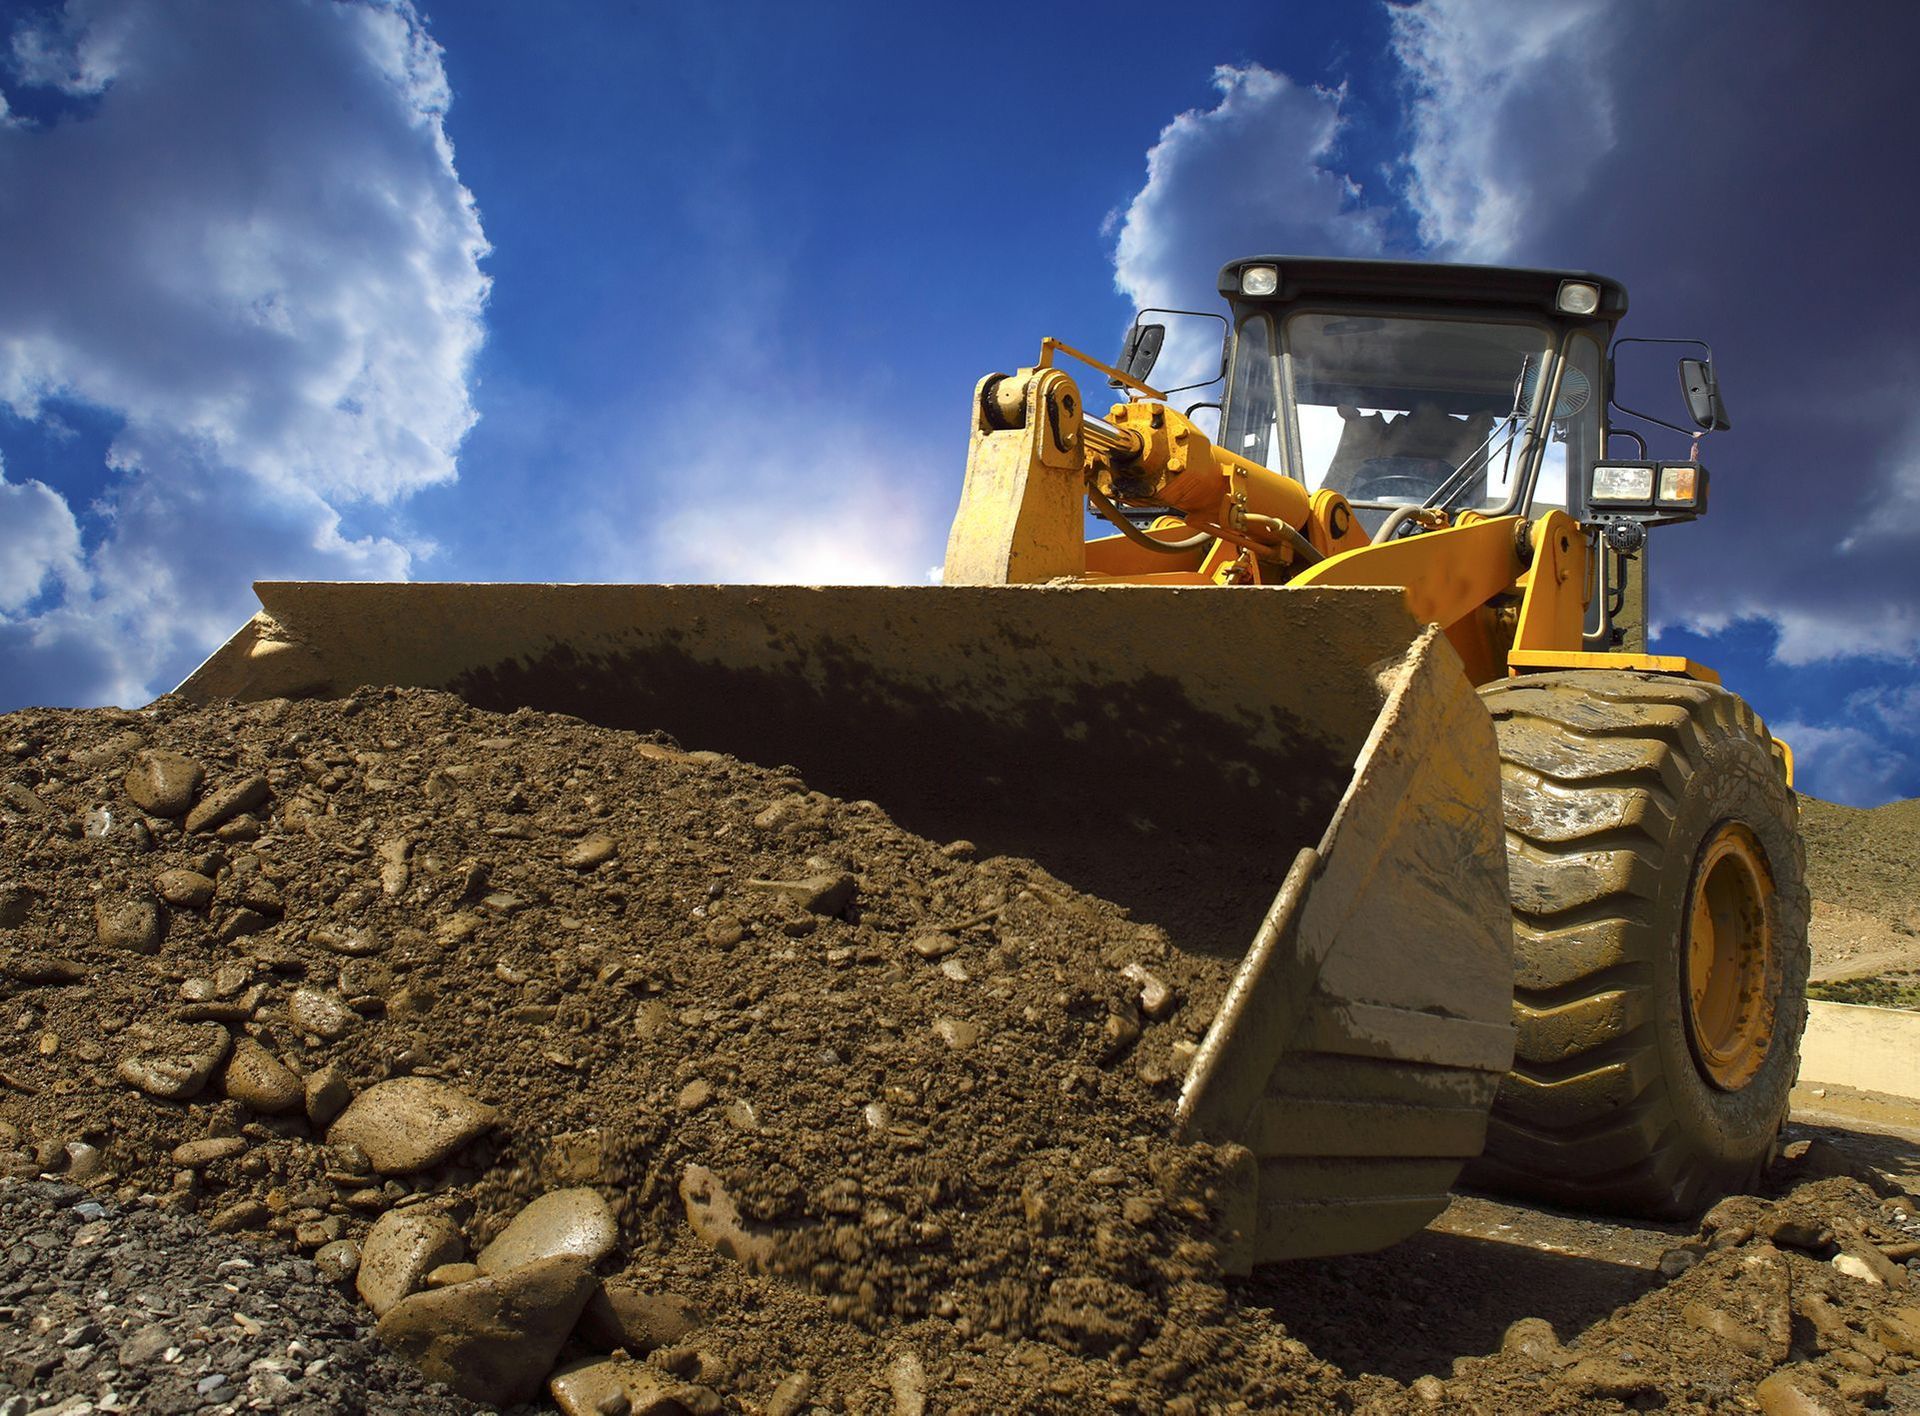 A bulldozer is scooping dirt from a pile of rocks